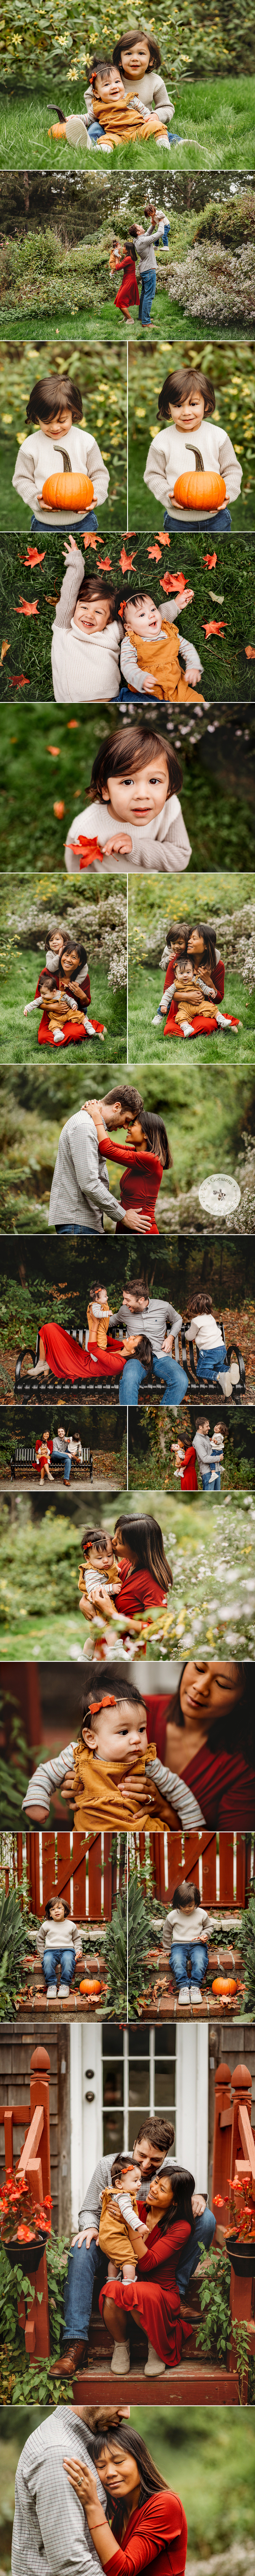 fall portraits in Dedham MA home garden photographed by Boston family photographer Helena Goessens Photography 